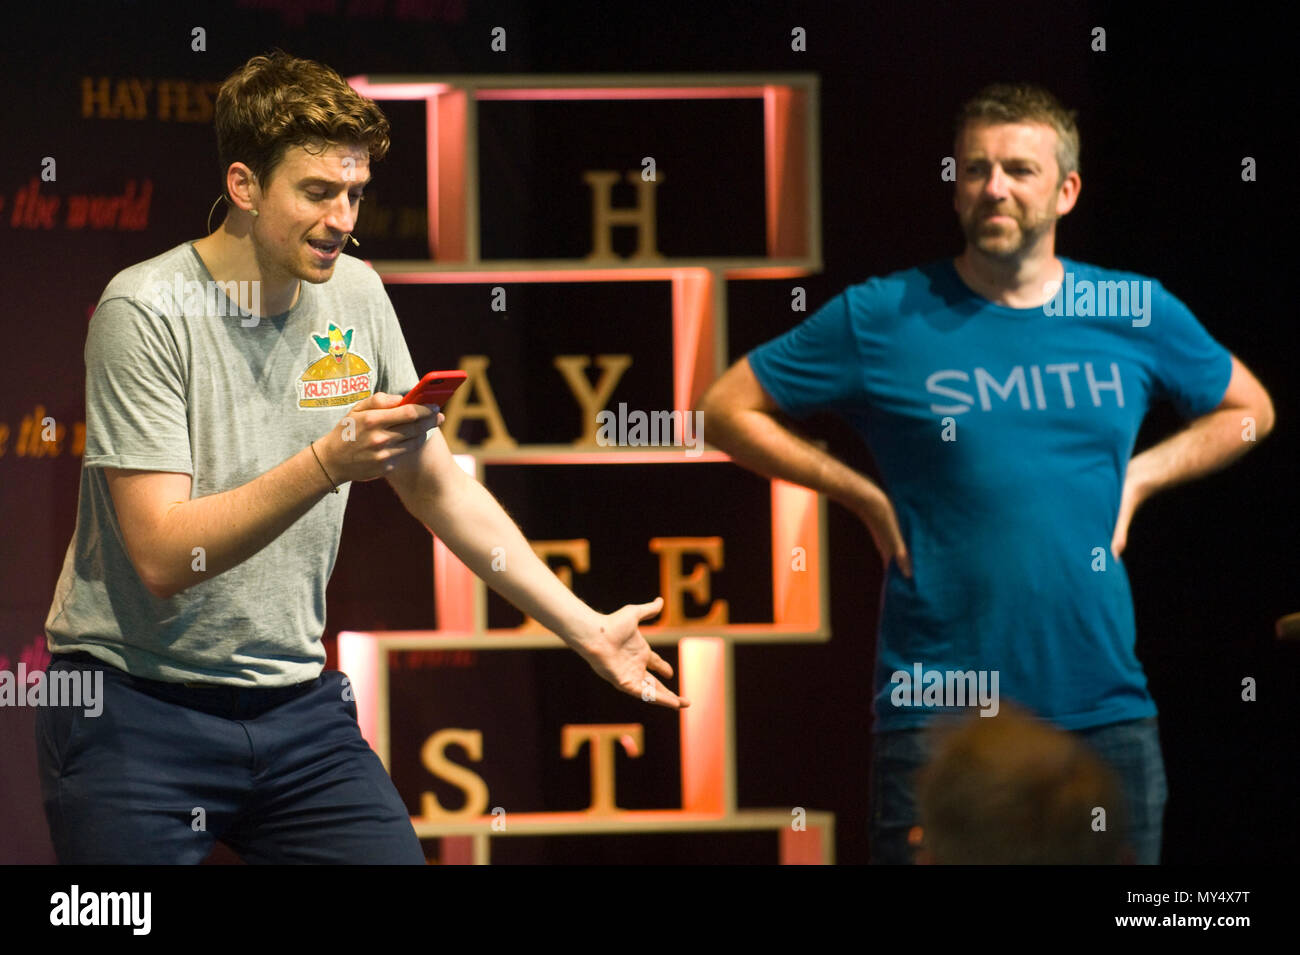 Greg James & Chris Smith on stage at Hay Festival 2018 Hay-on-Wye Powys Wales UK Stock Photo